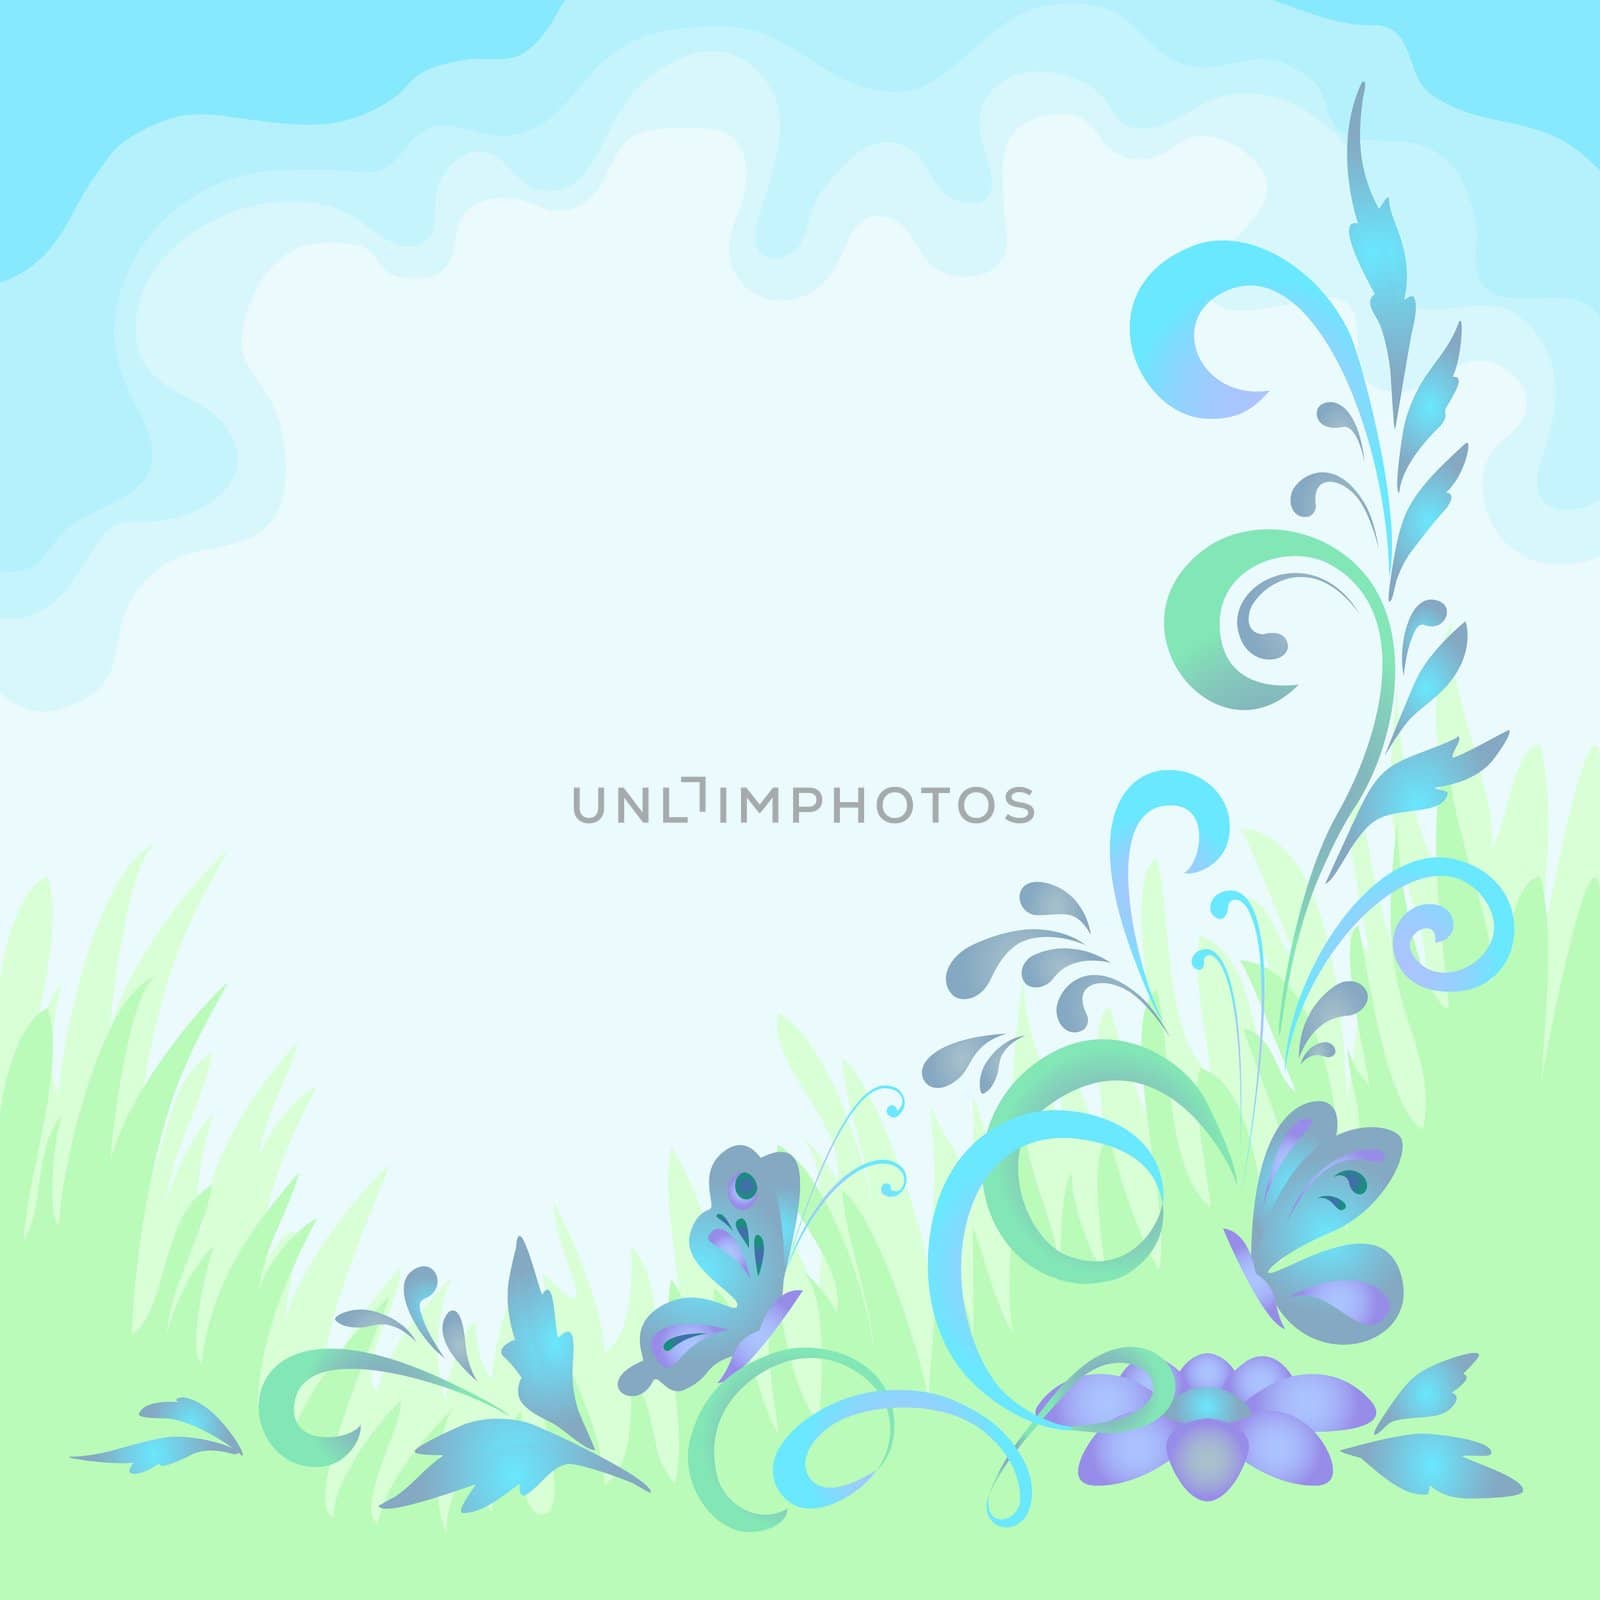 Abstract floral green and blue background with symbolical flowers and butterflies